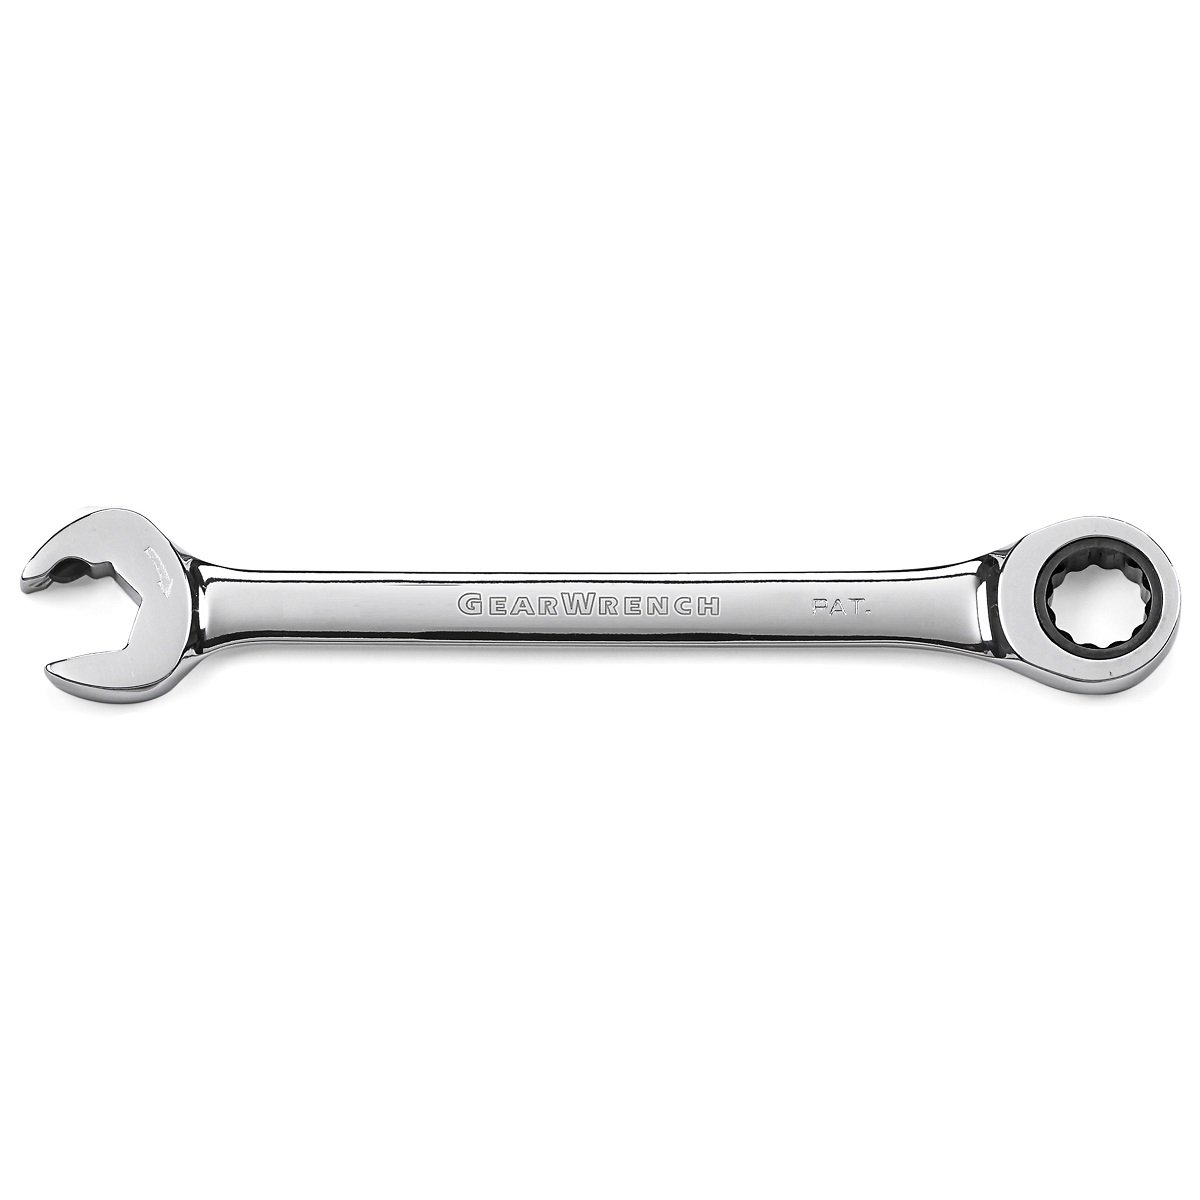 GearWrench Ratcheting Open End Combination Spanner Wrench 14mm 85514D